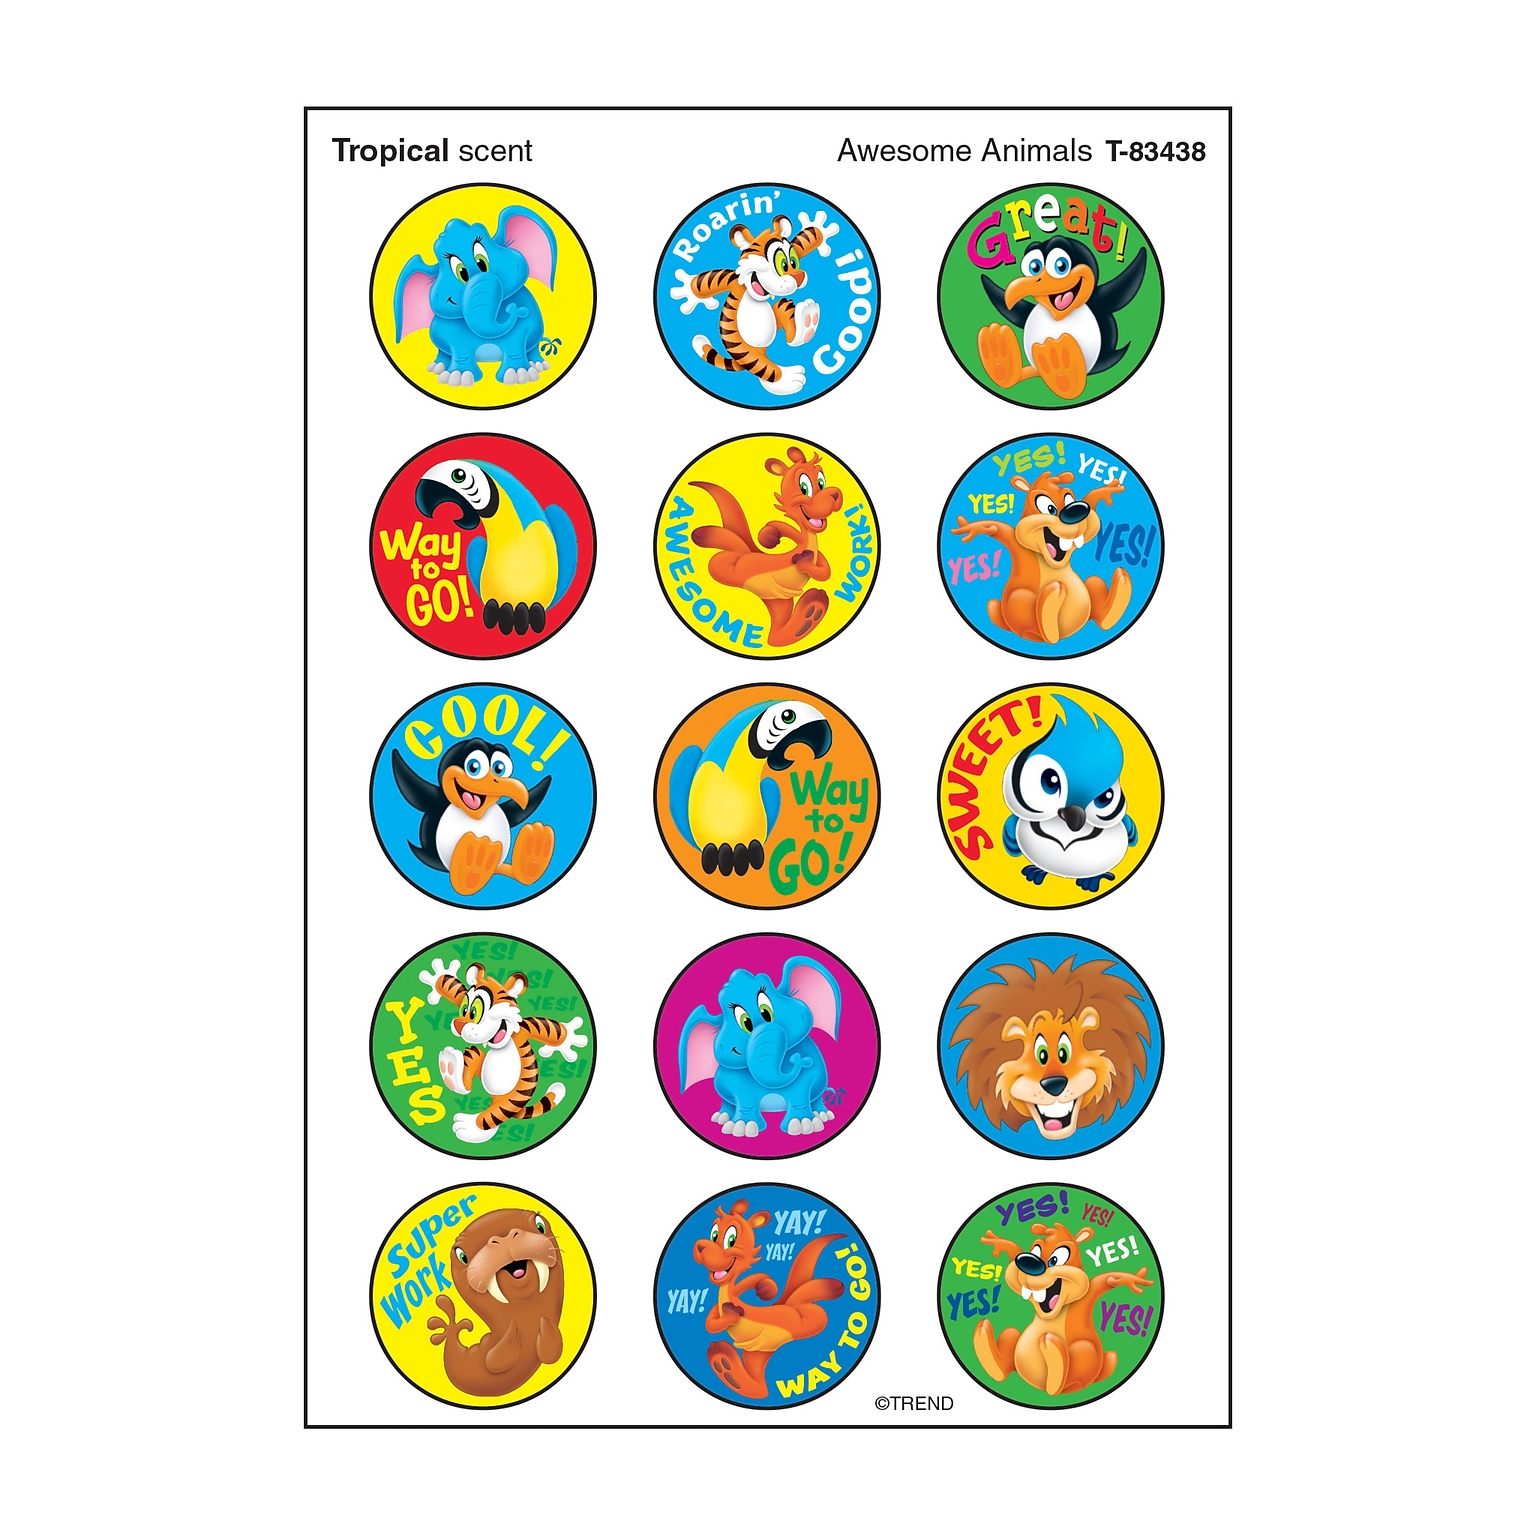 Trend Awesome Animals Tropical Scent Stickers, Assorted Colors, 60 Stickers/Pack, 6 Packs/Bundle (T-83438)